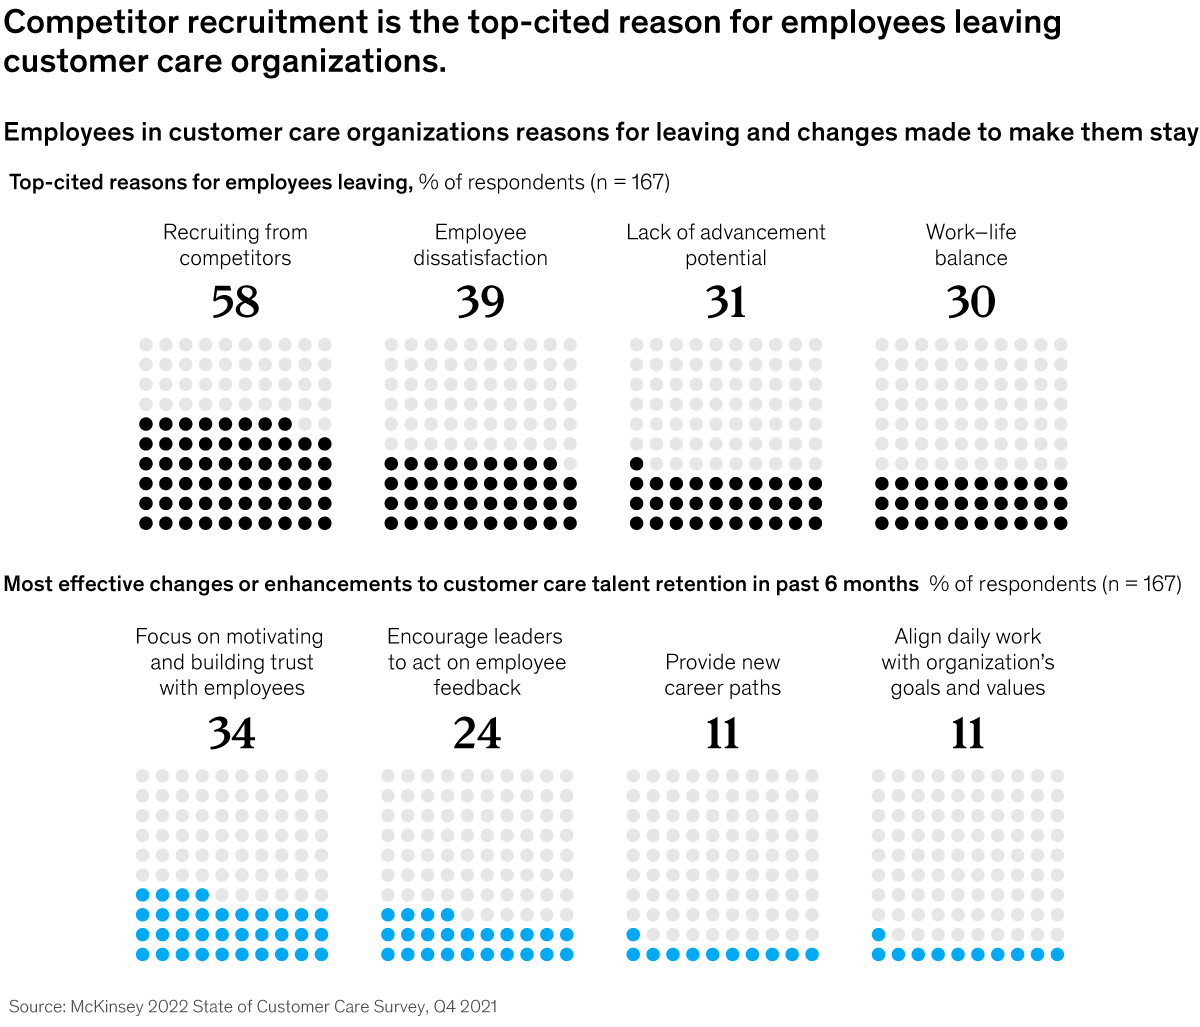 Chart detailing competitor recruitment as the top-cited reason for employees leaving customer care organization